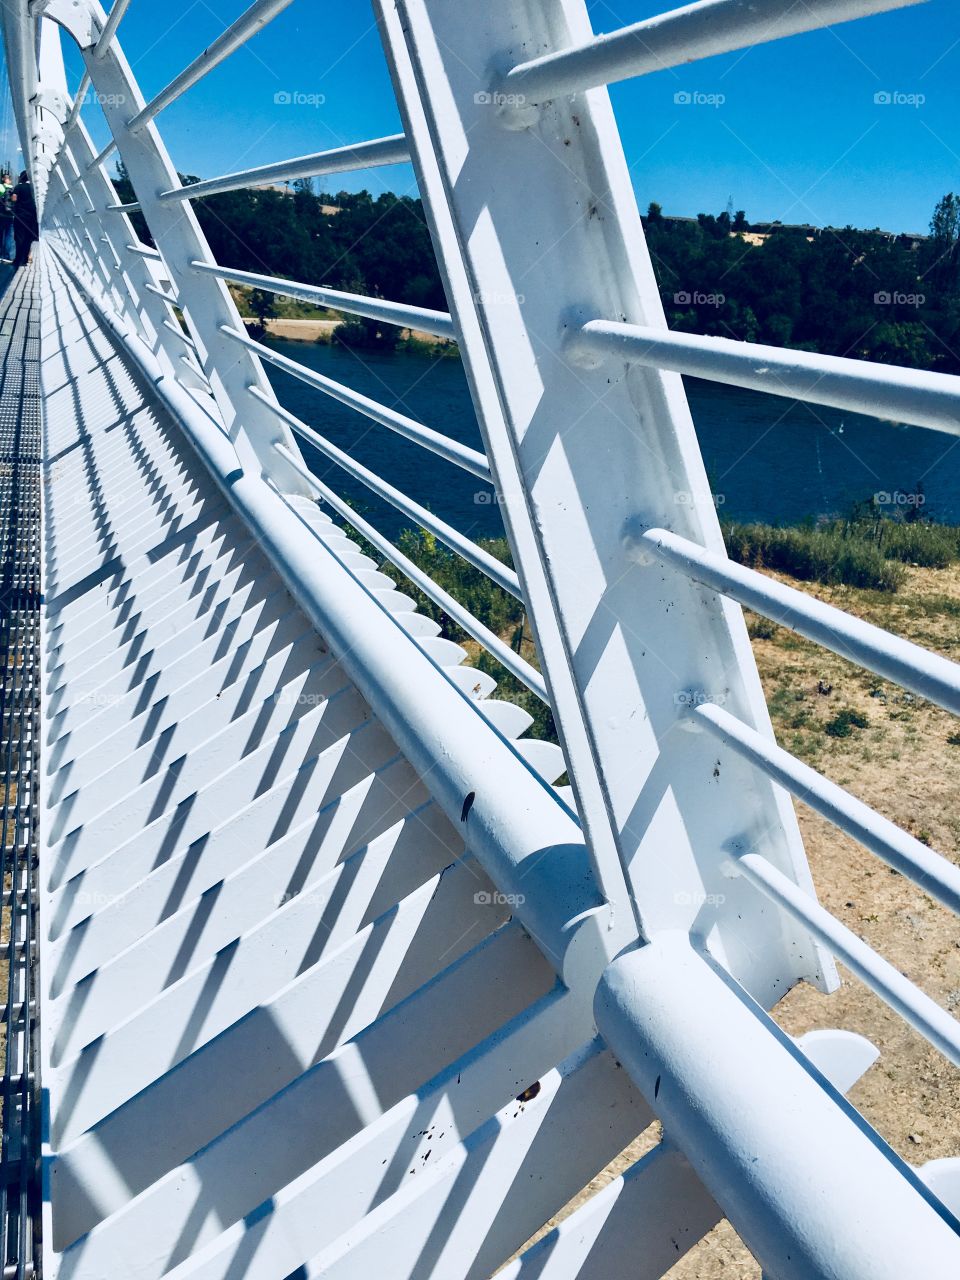 A prospective of the side railing at Sundial bridge